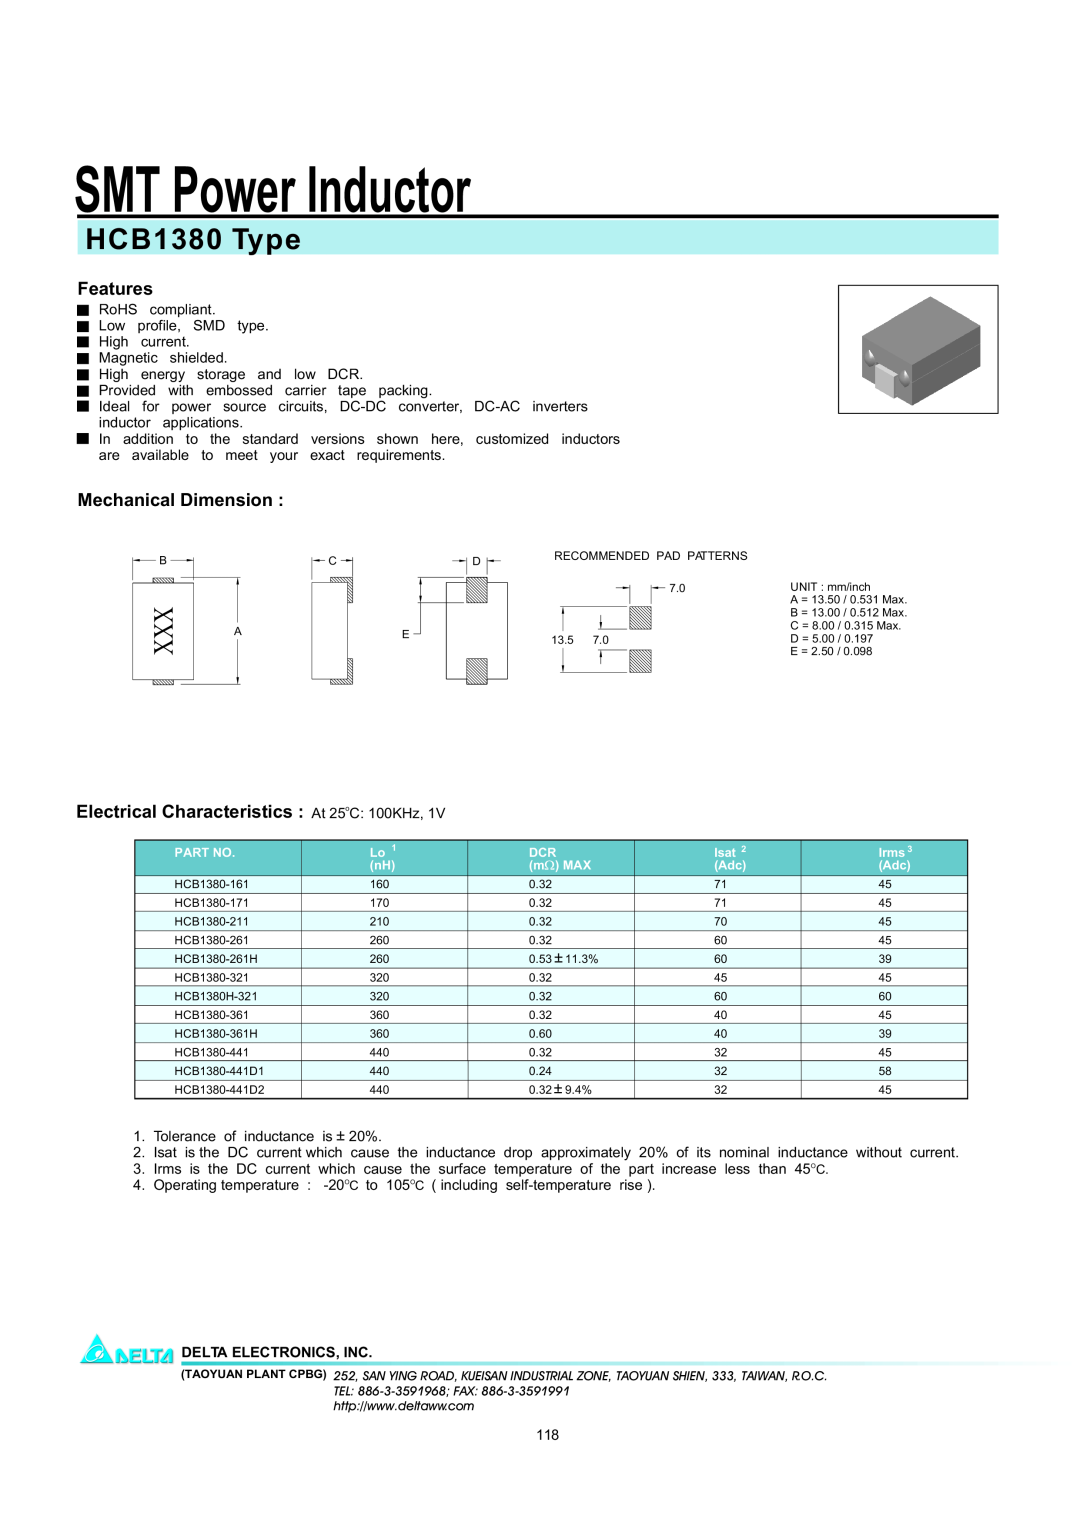 Delta Electronics manual SMT Power Inductor, HCB1380 Type, Features, Mechanical Dimension, Delta Electronics, Inc 